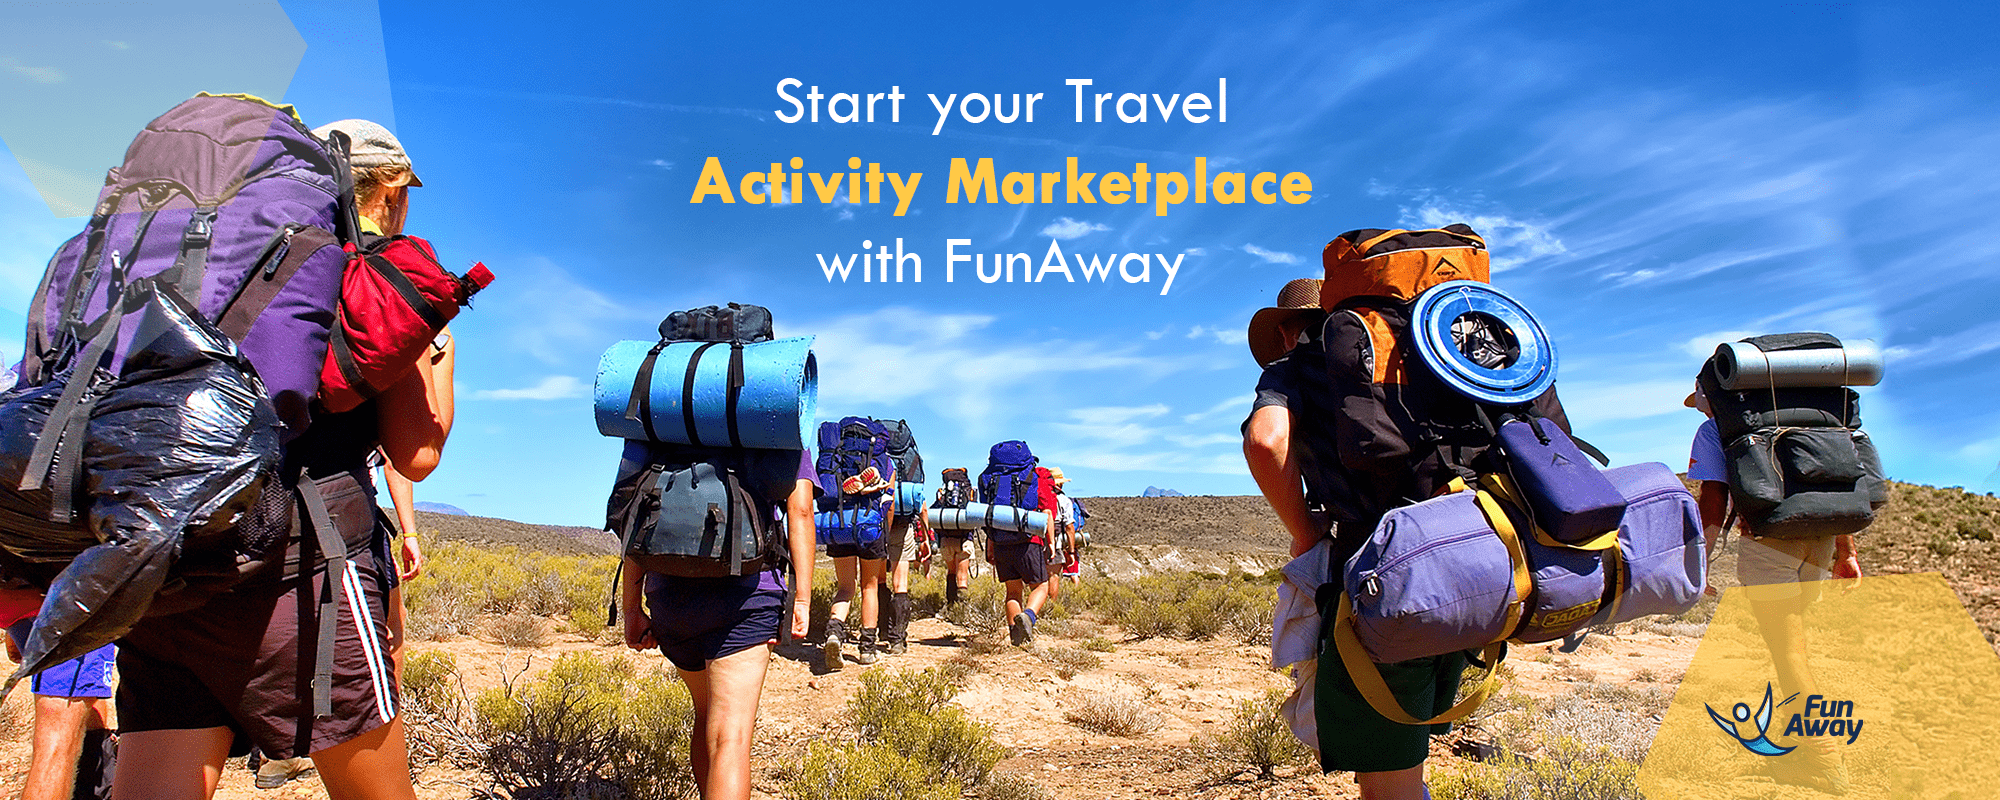 FunAway (travel activity marketplace builder) gets acclaimed as Rising Star of 2018 by Finance Online